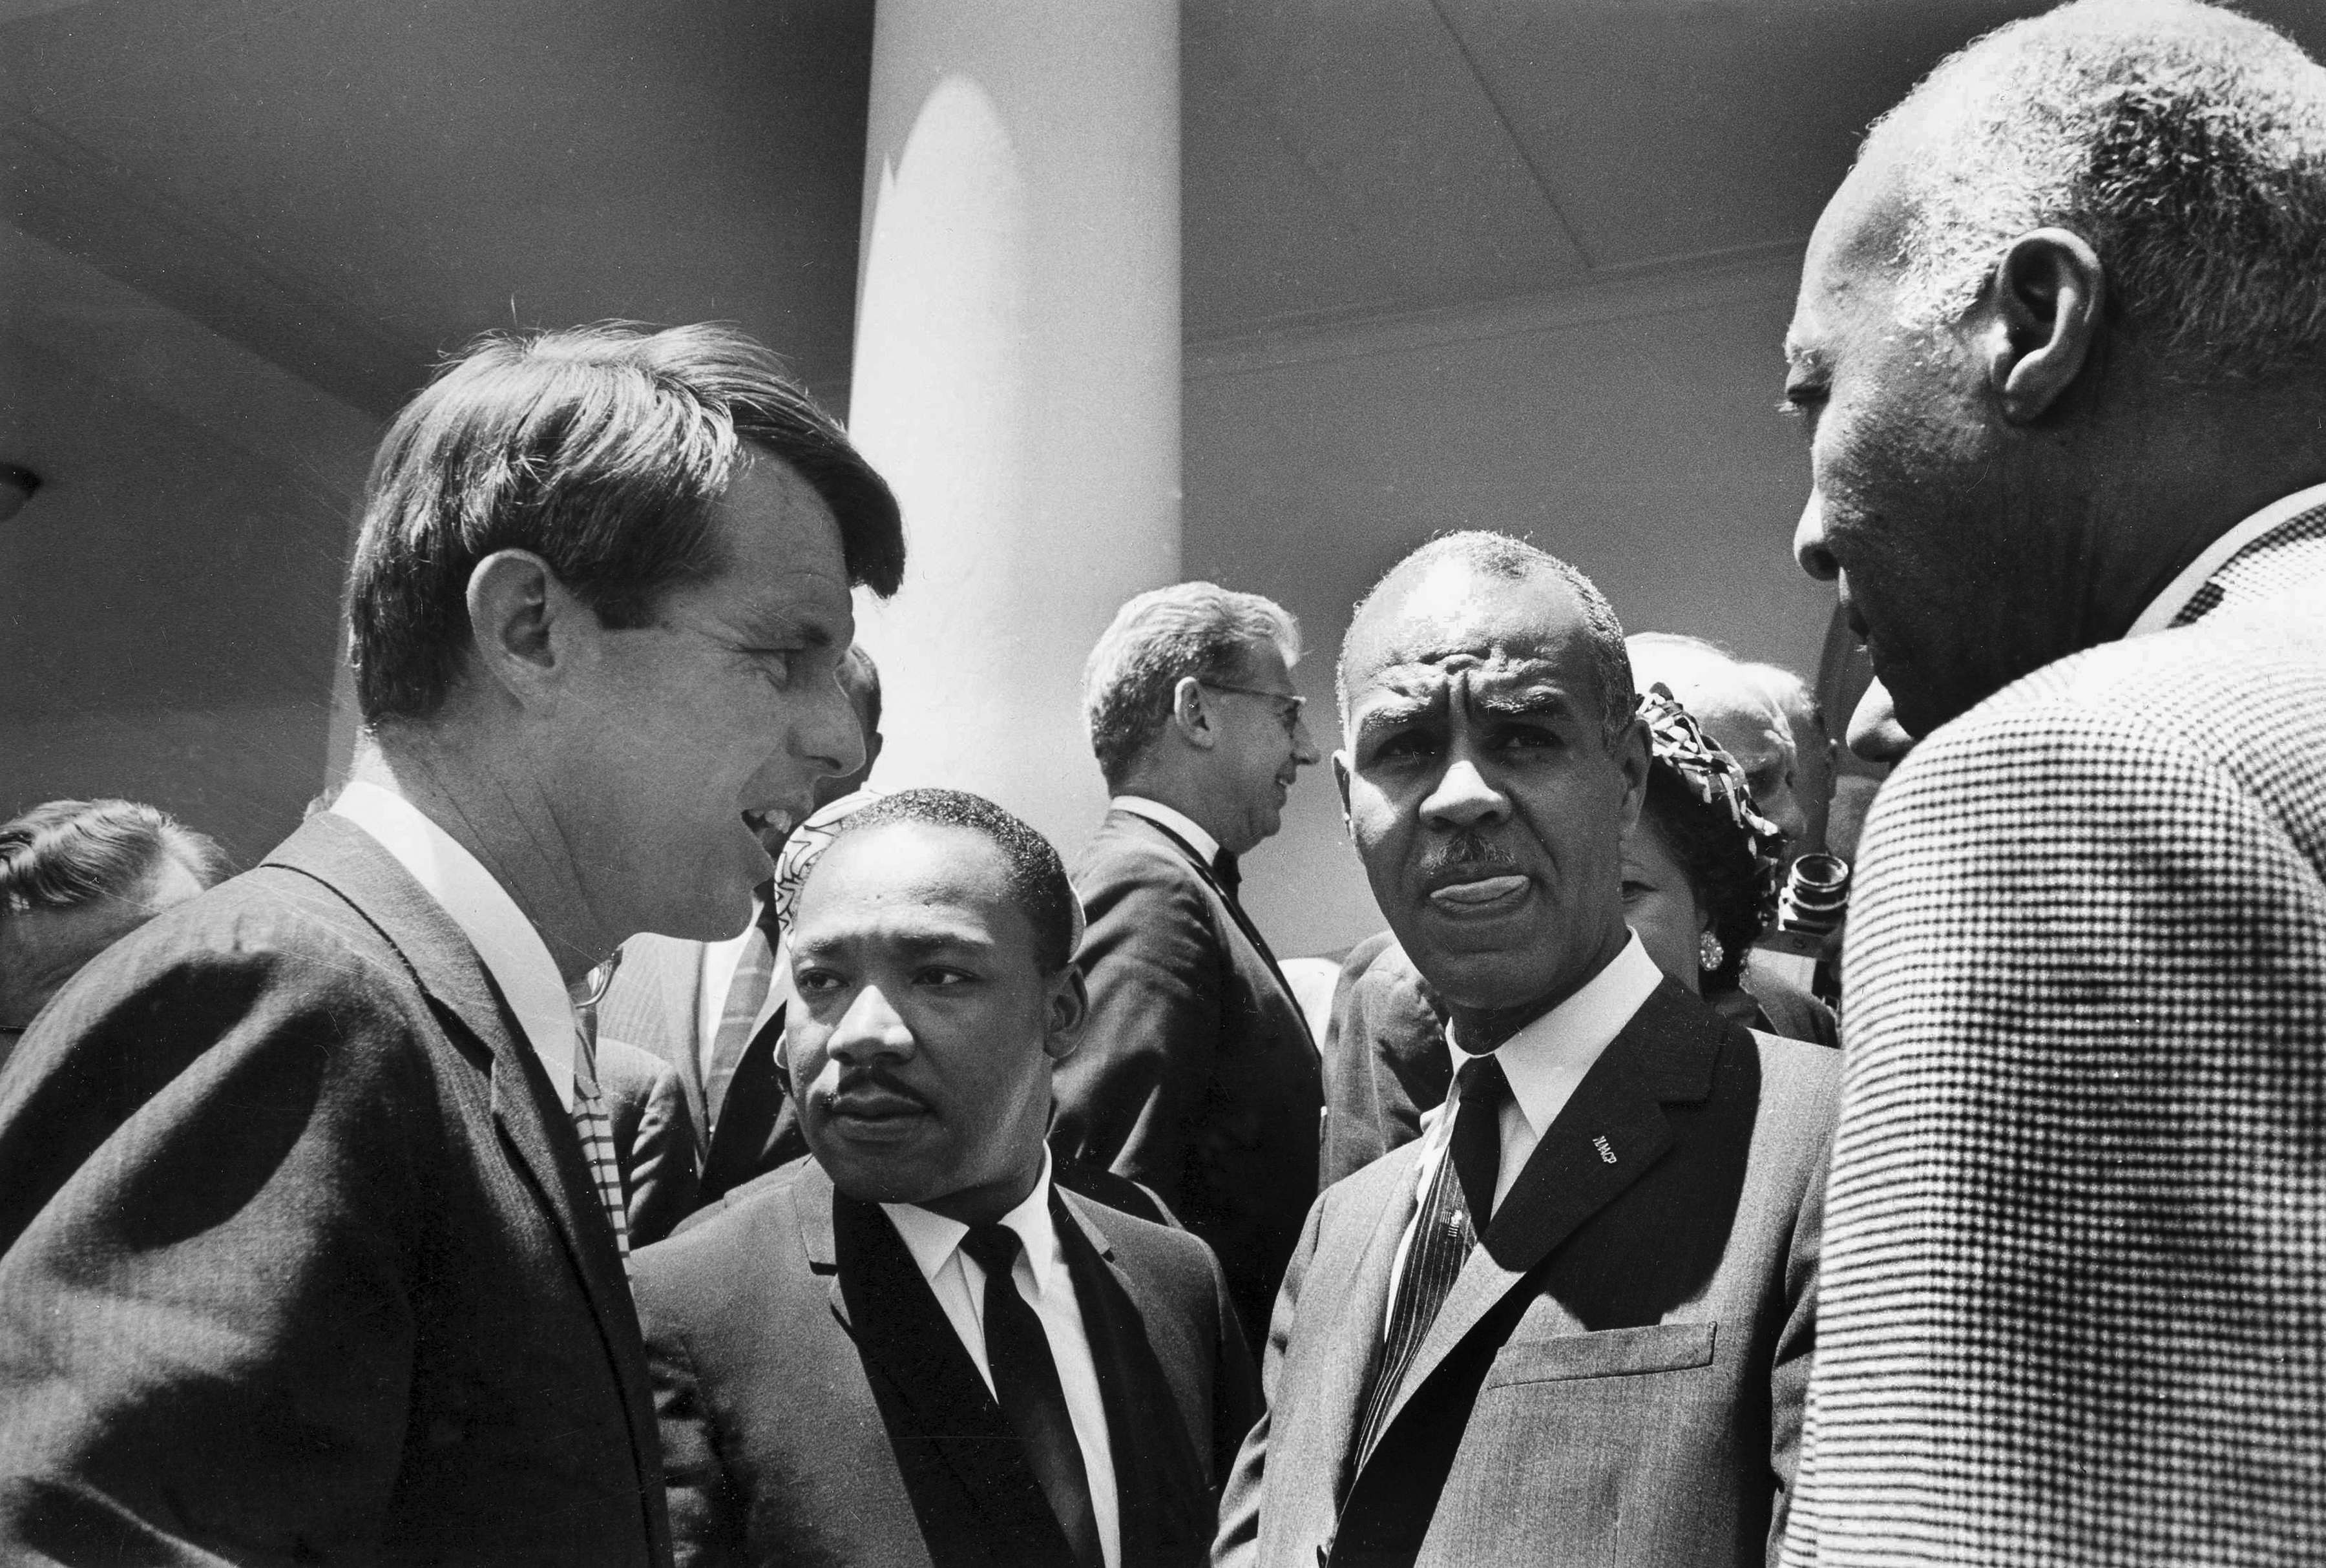 FILE - In this June 22, 1963, file photo, U.S. Attorney General Robert F. Kennedy, left, speaks with civil rights leaders, beginning second from left, Rev. Martin Luther King, Jr., head of the Southern Christian Leadership Conference; Roy Wilkins, executive secretary of the NAACP; and A. Phillip Randolph, president of Brotherhood of Sleeping Car Porters, on the White House grounds, in Washington, DC. Civil rights lawyer Joseph Rauh stands in the background at center. Nearly 50 years after Robert F. Kennedy's assassination, a new documentary series on his life and transformation into a liberal hero is coming to Netflix. 